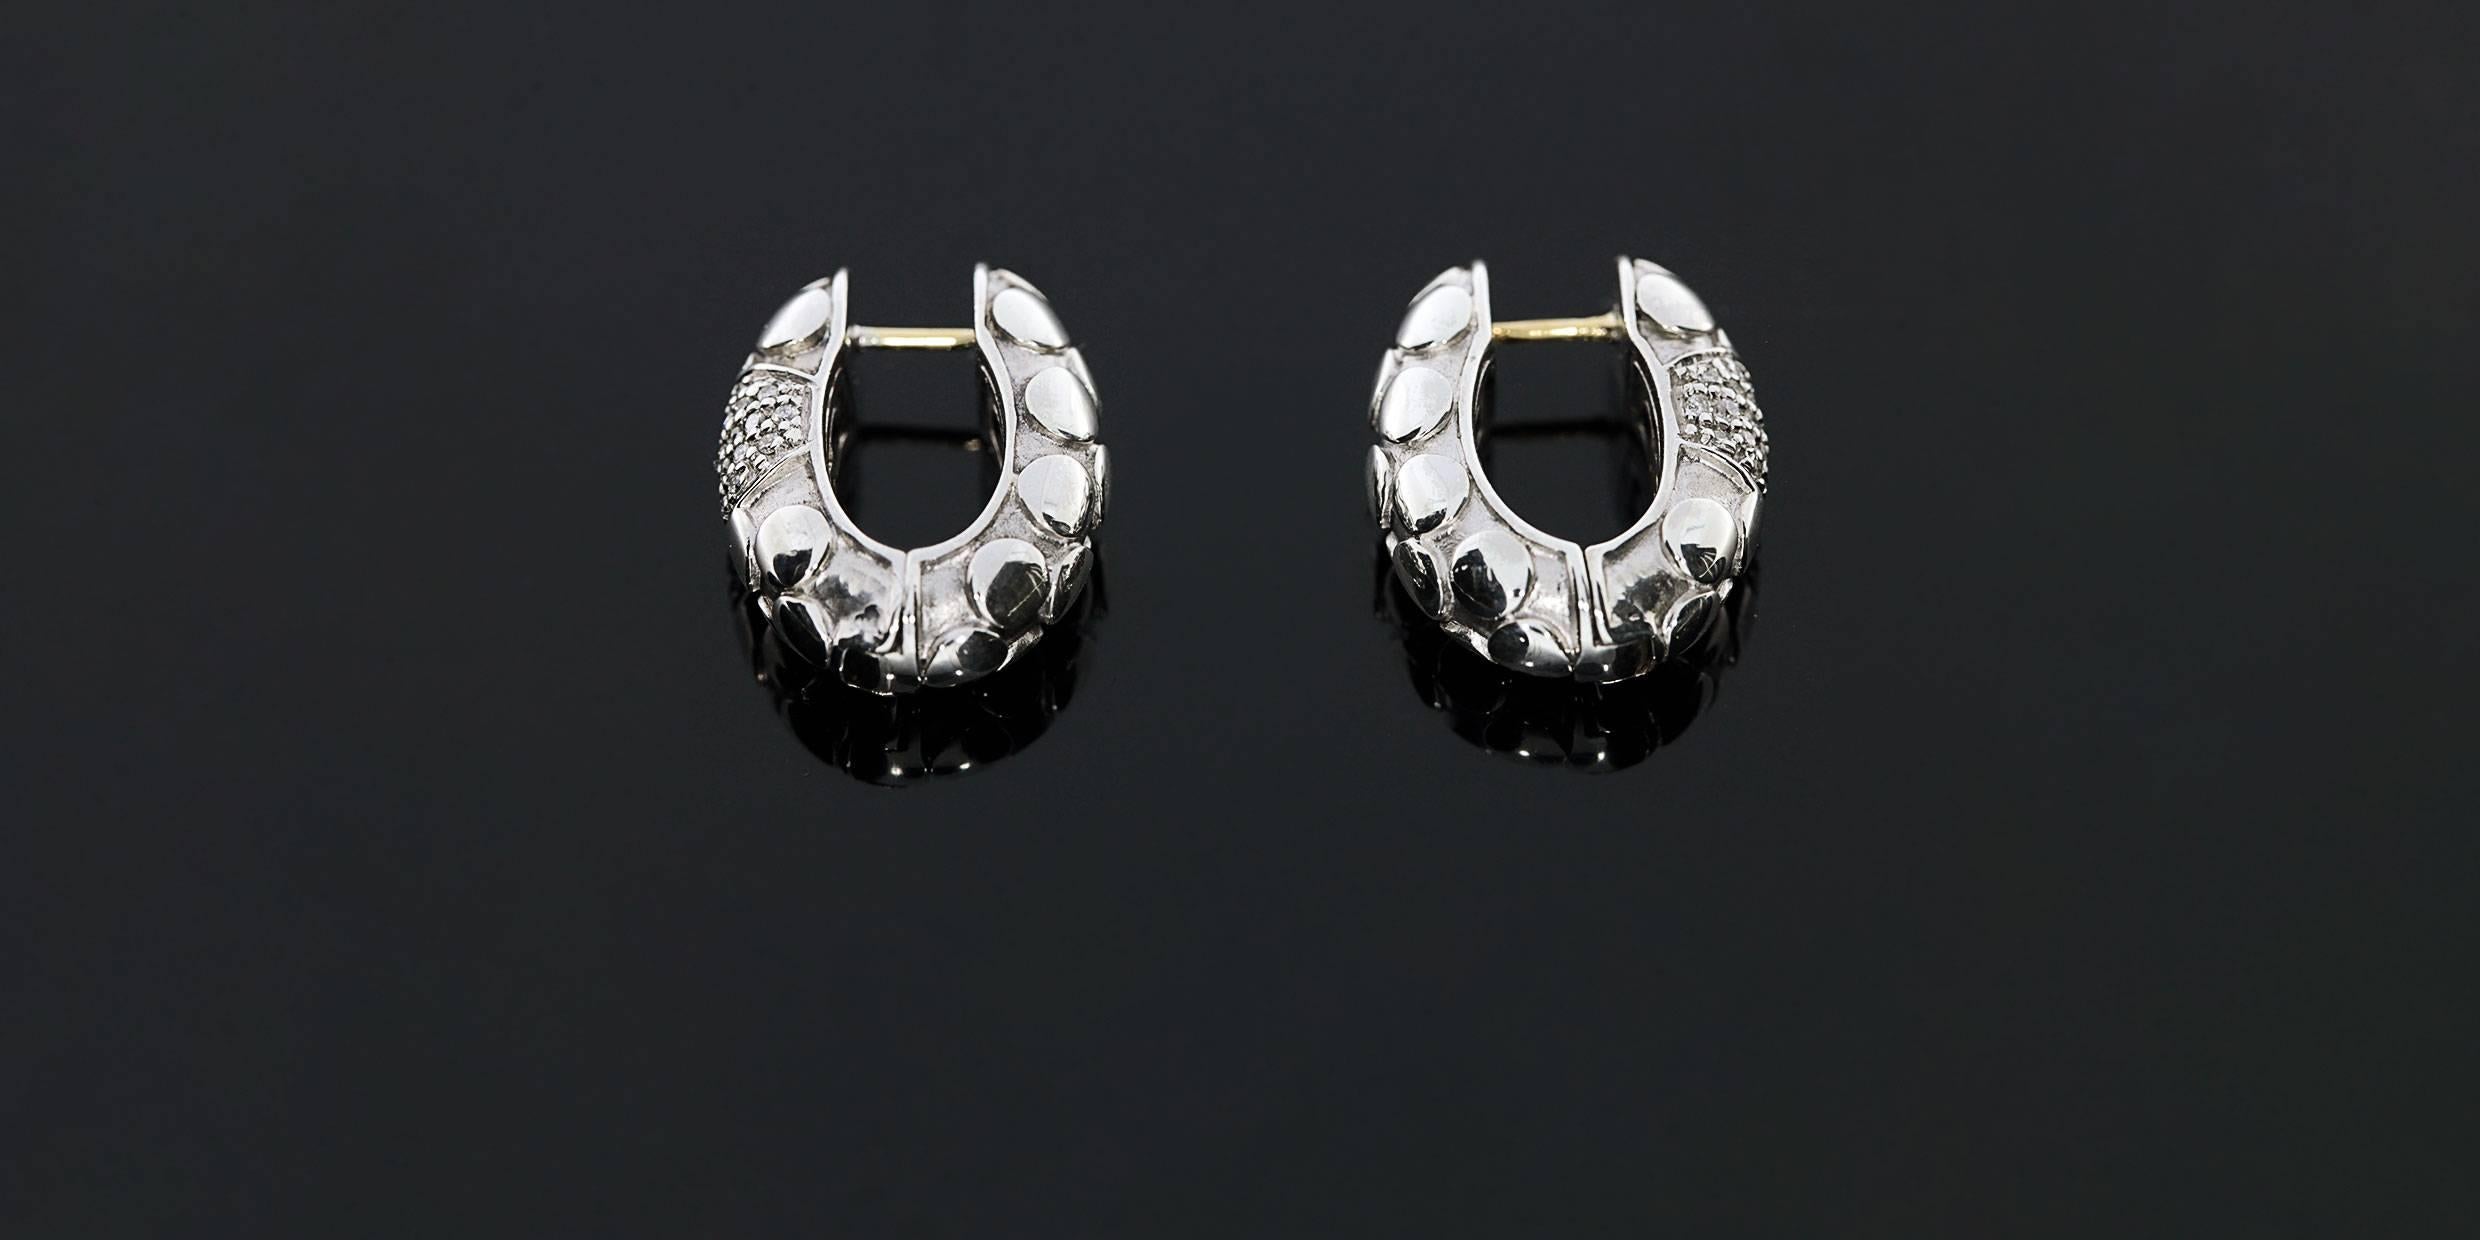 Each piece of John Hardy jewelry has been hand crafted in Bali since 1975. John Hardy is dedicated to creating timeless one-of-a-kind pieces that are brilliantly alive. These beautiful earrings feature Hardy's Kali dot design in sterling silver,